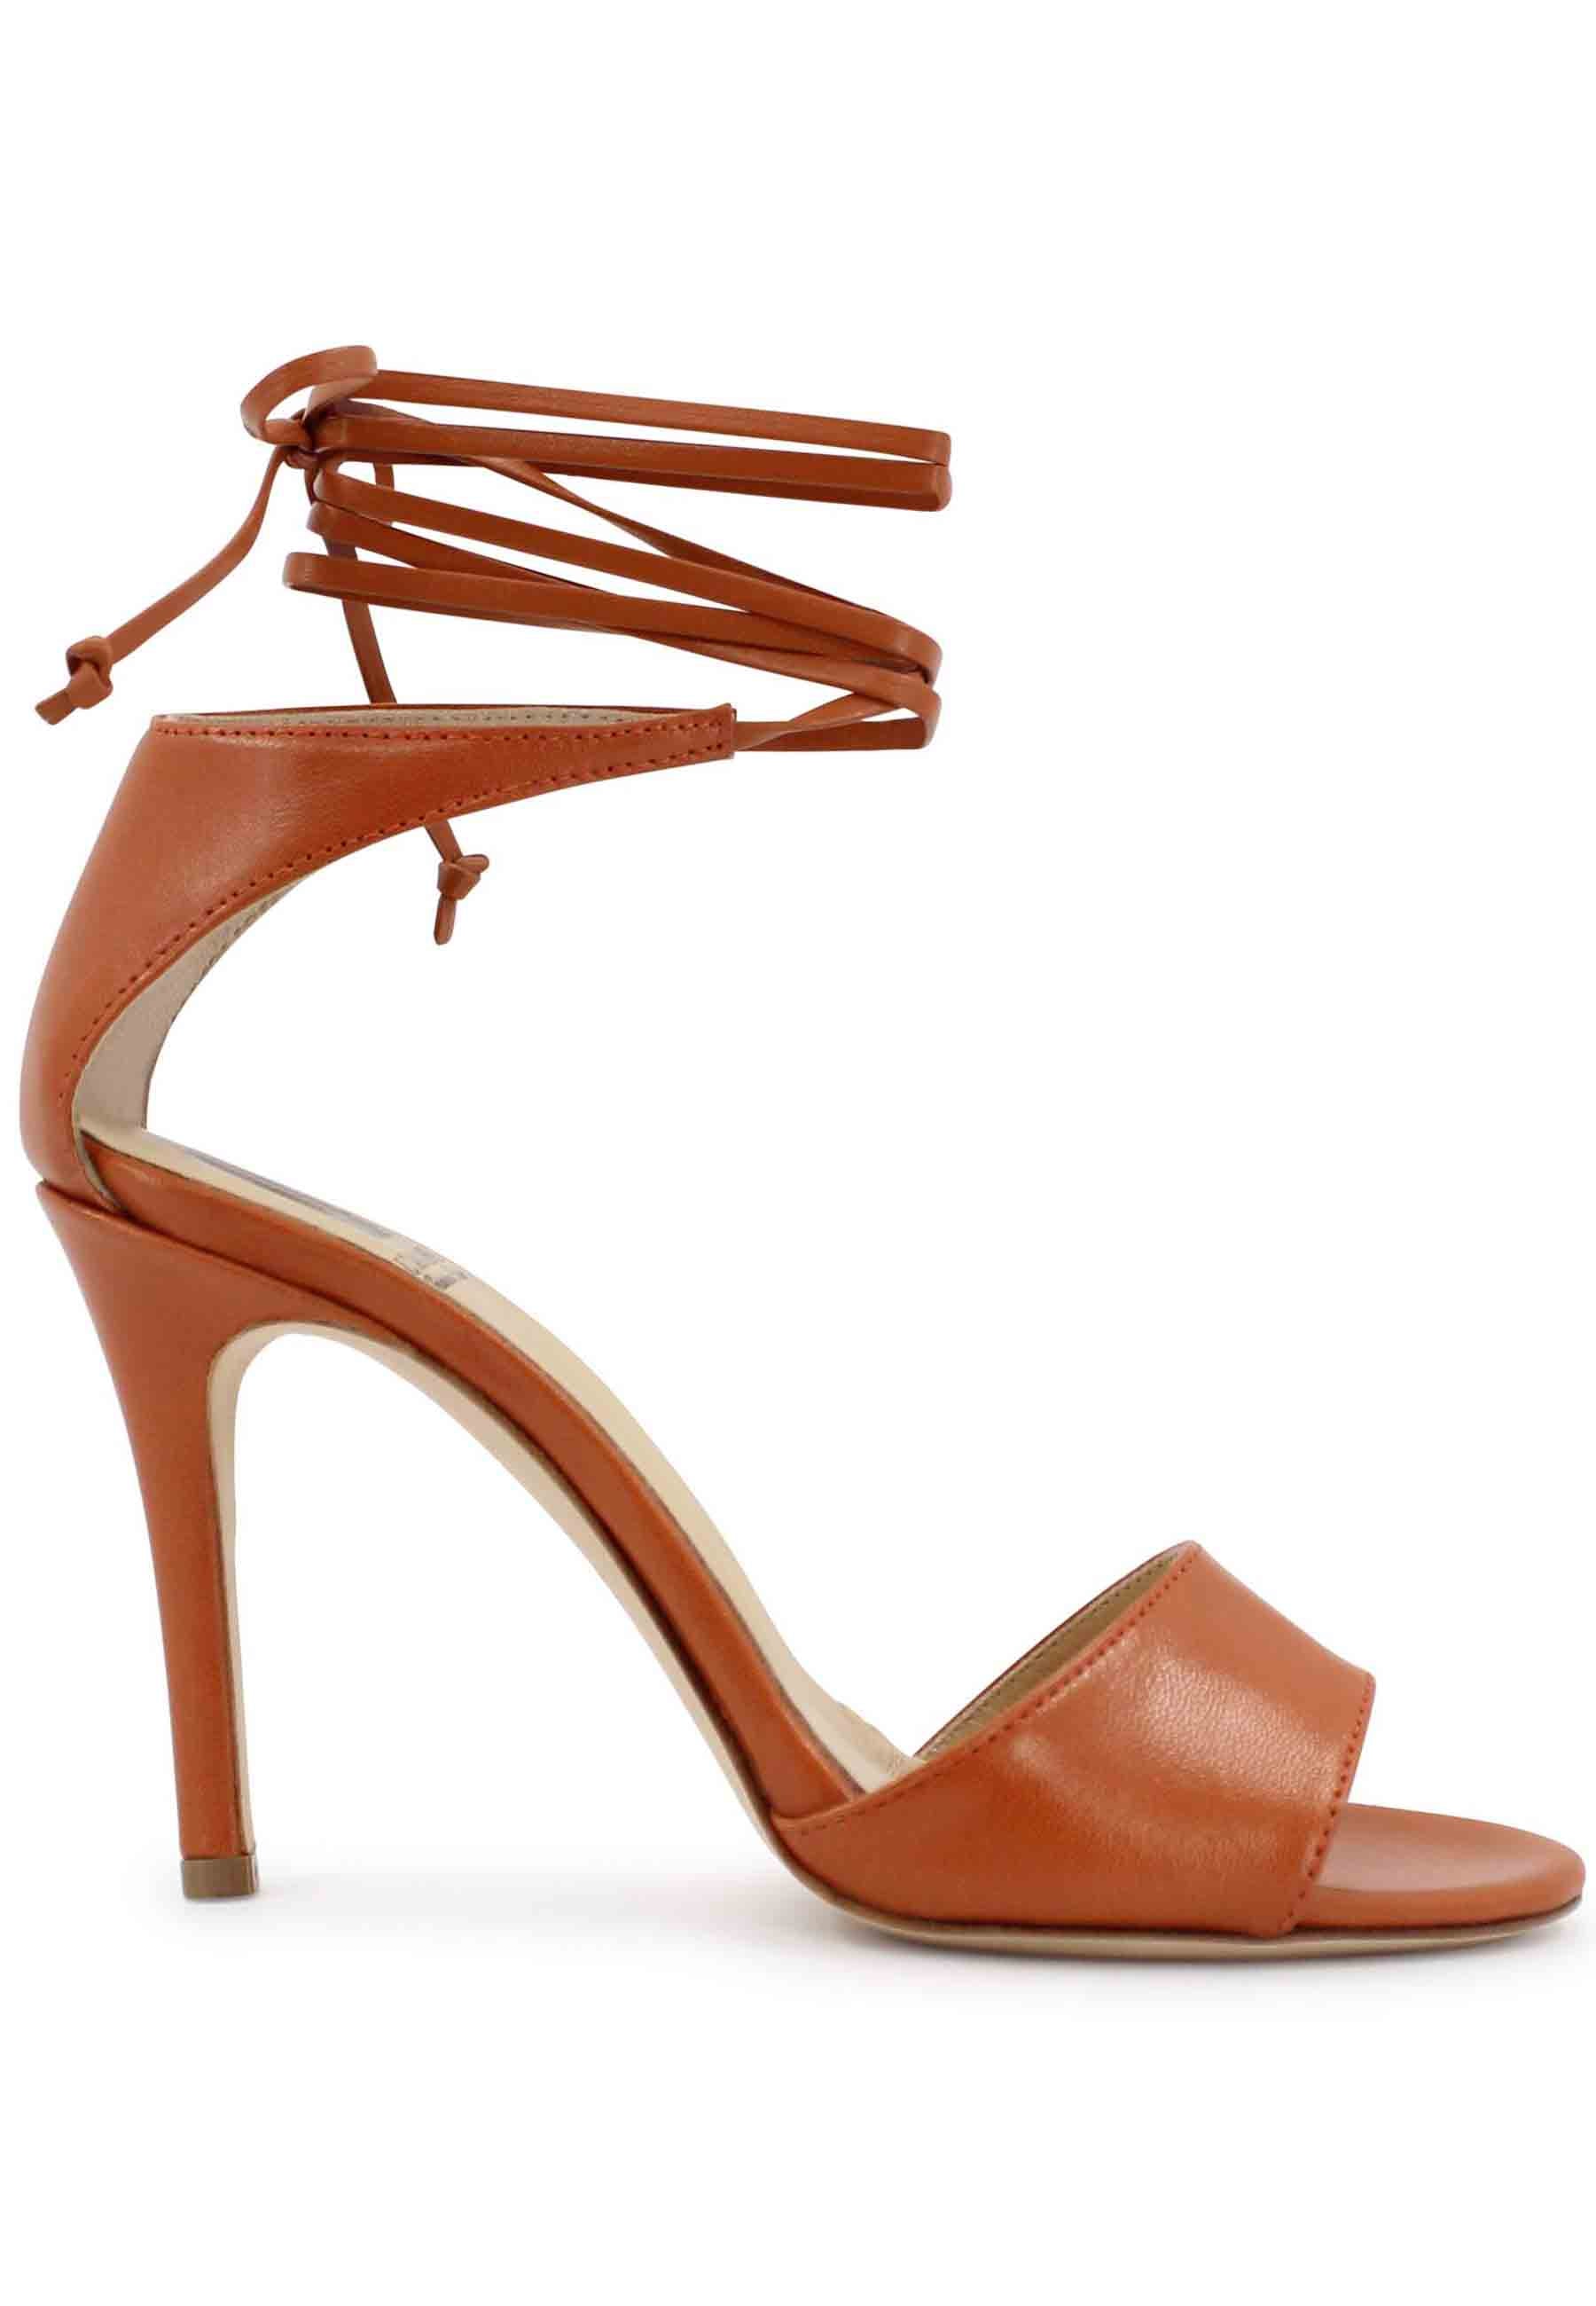 Women's high heel brick leather sandals with high heel and ankle straps